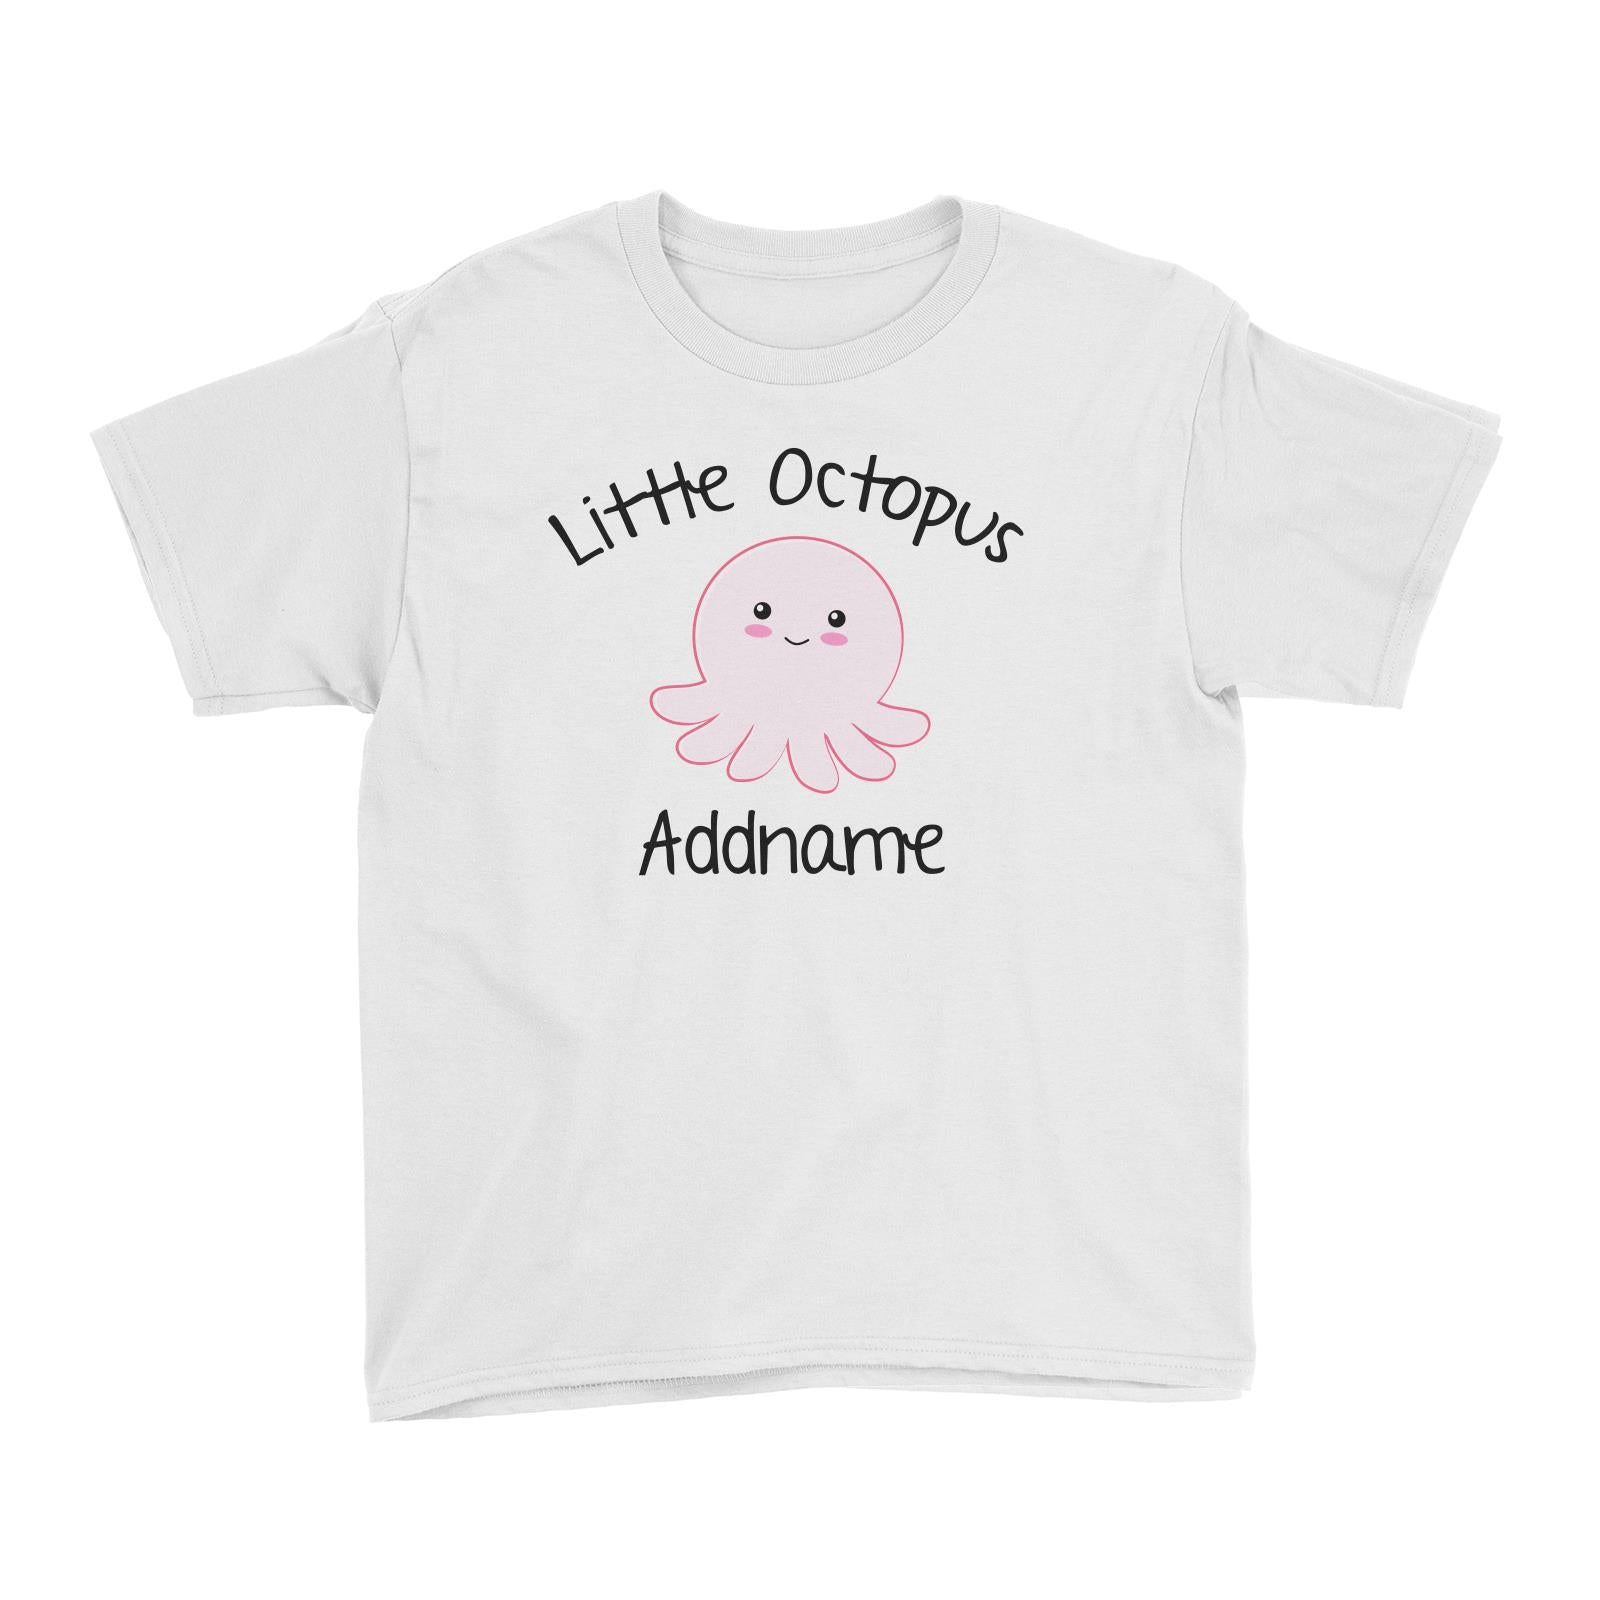 Cute Animals And Friends Series Little Octopus Boy Addname Kid's T-Shirt